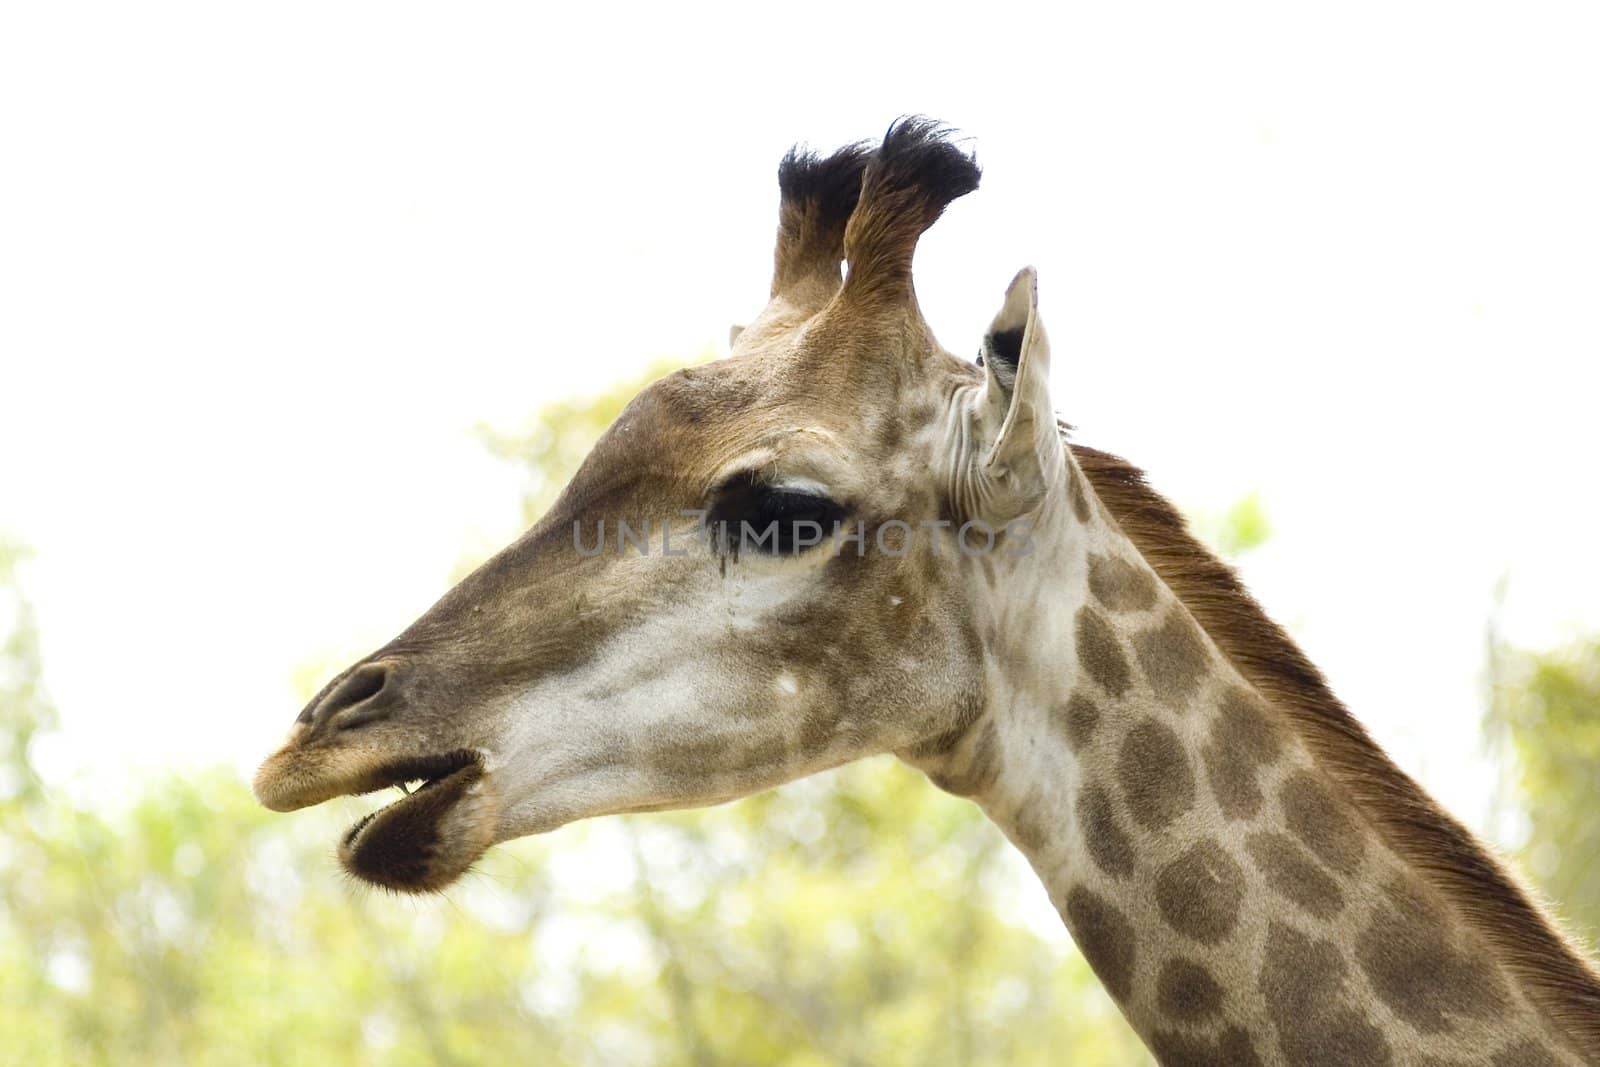 Giraffe in nature on the background of green foliage